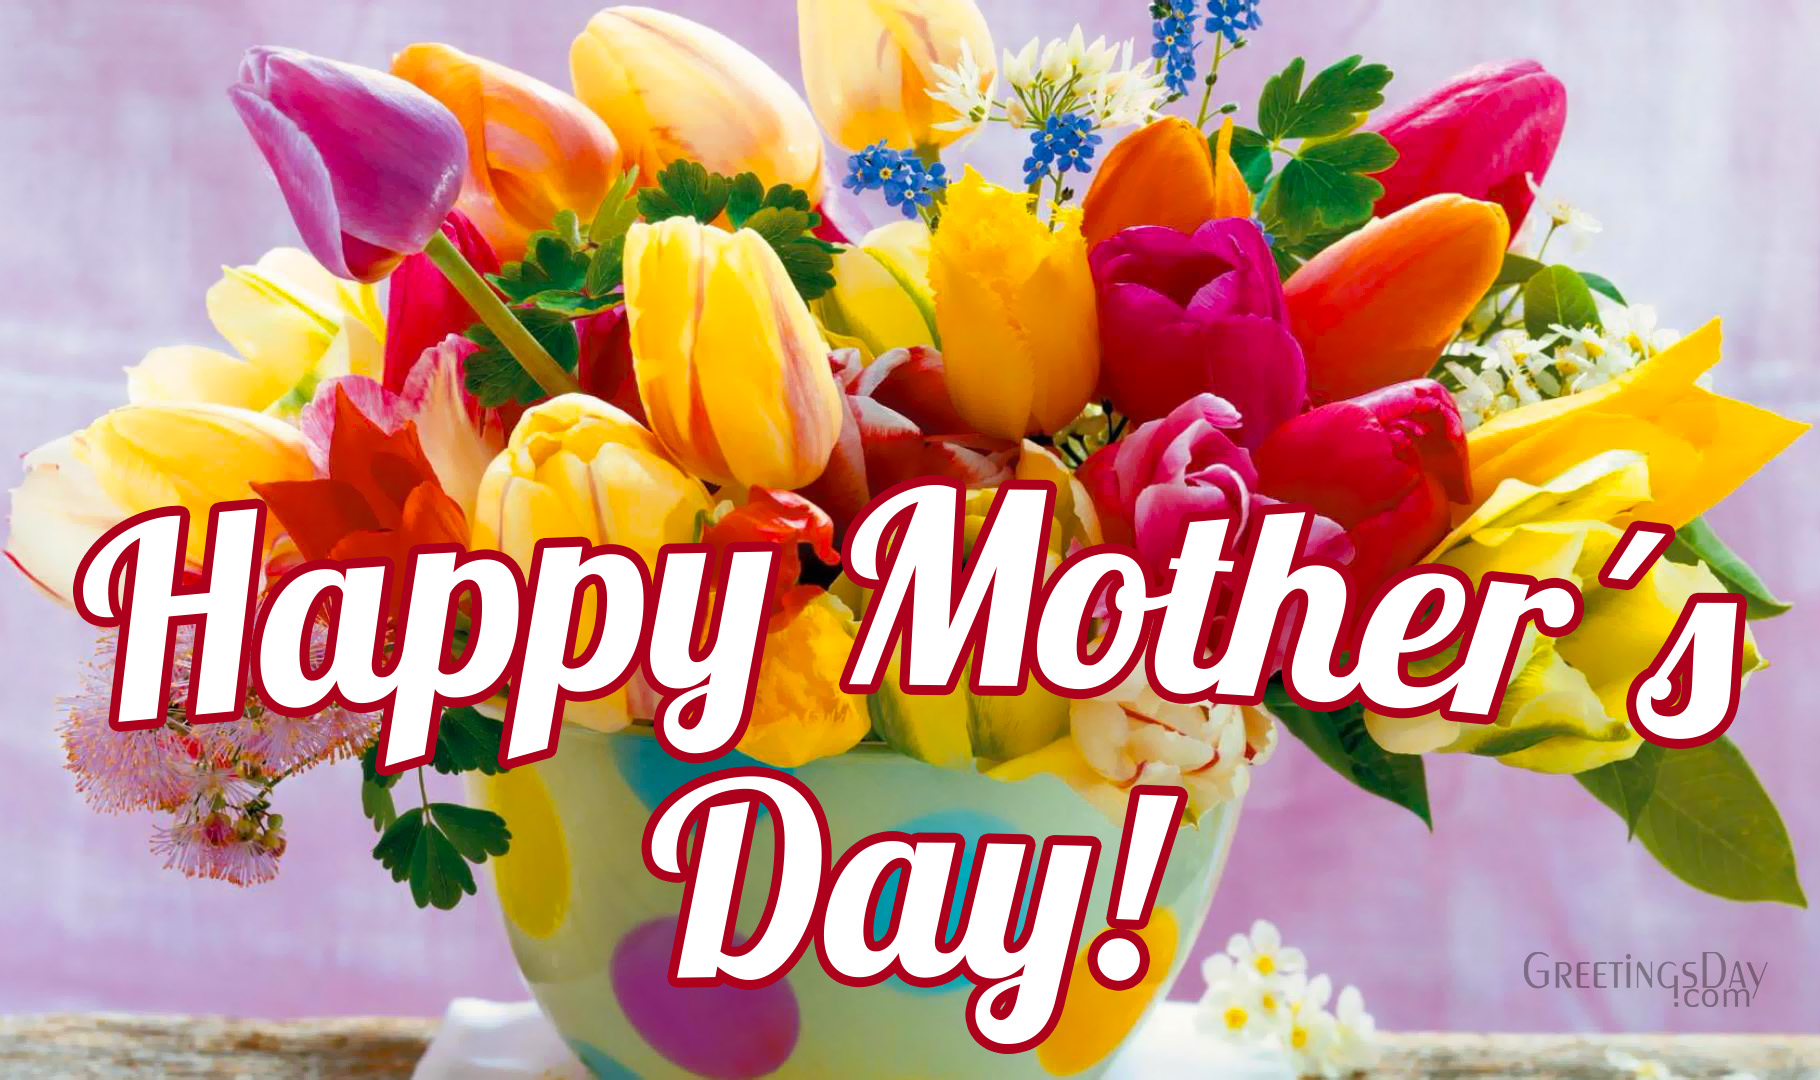 Happy Mother's Day Online Cards, Photos and Wishes. Mother's Day